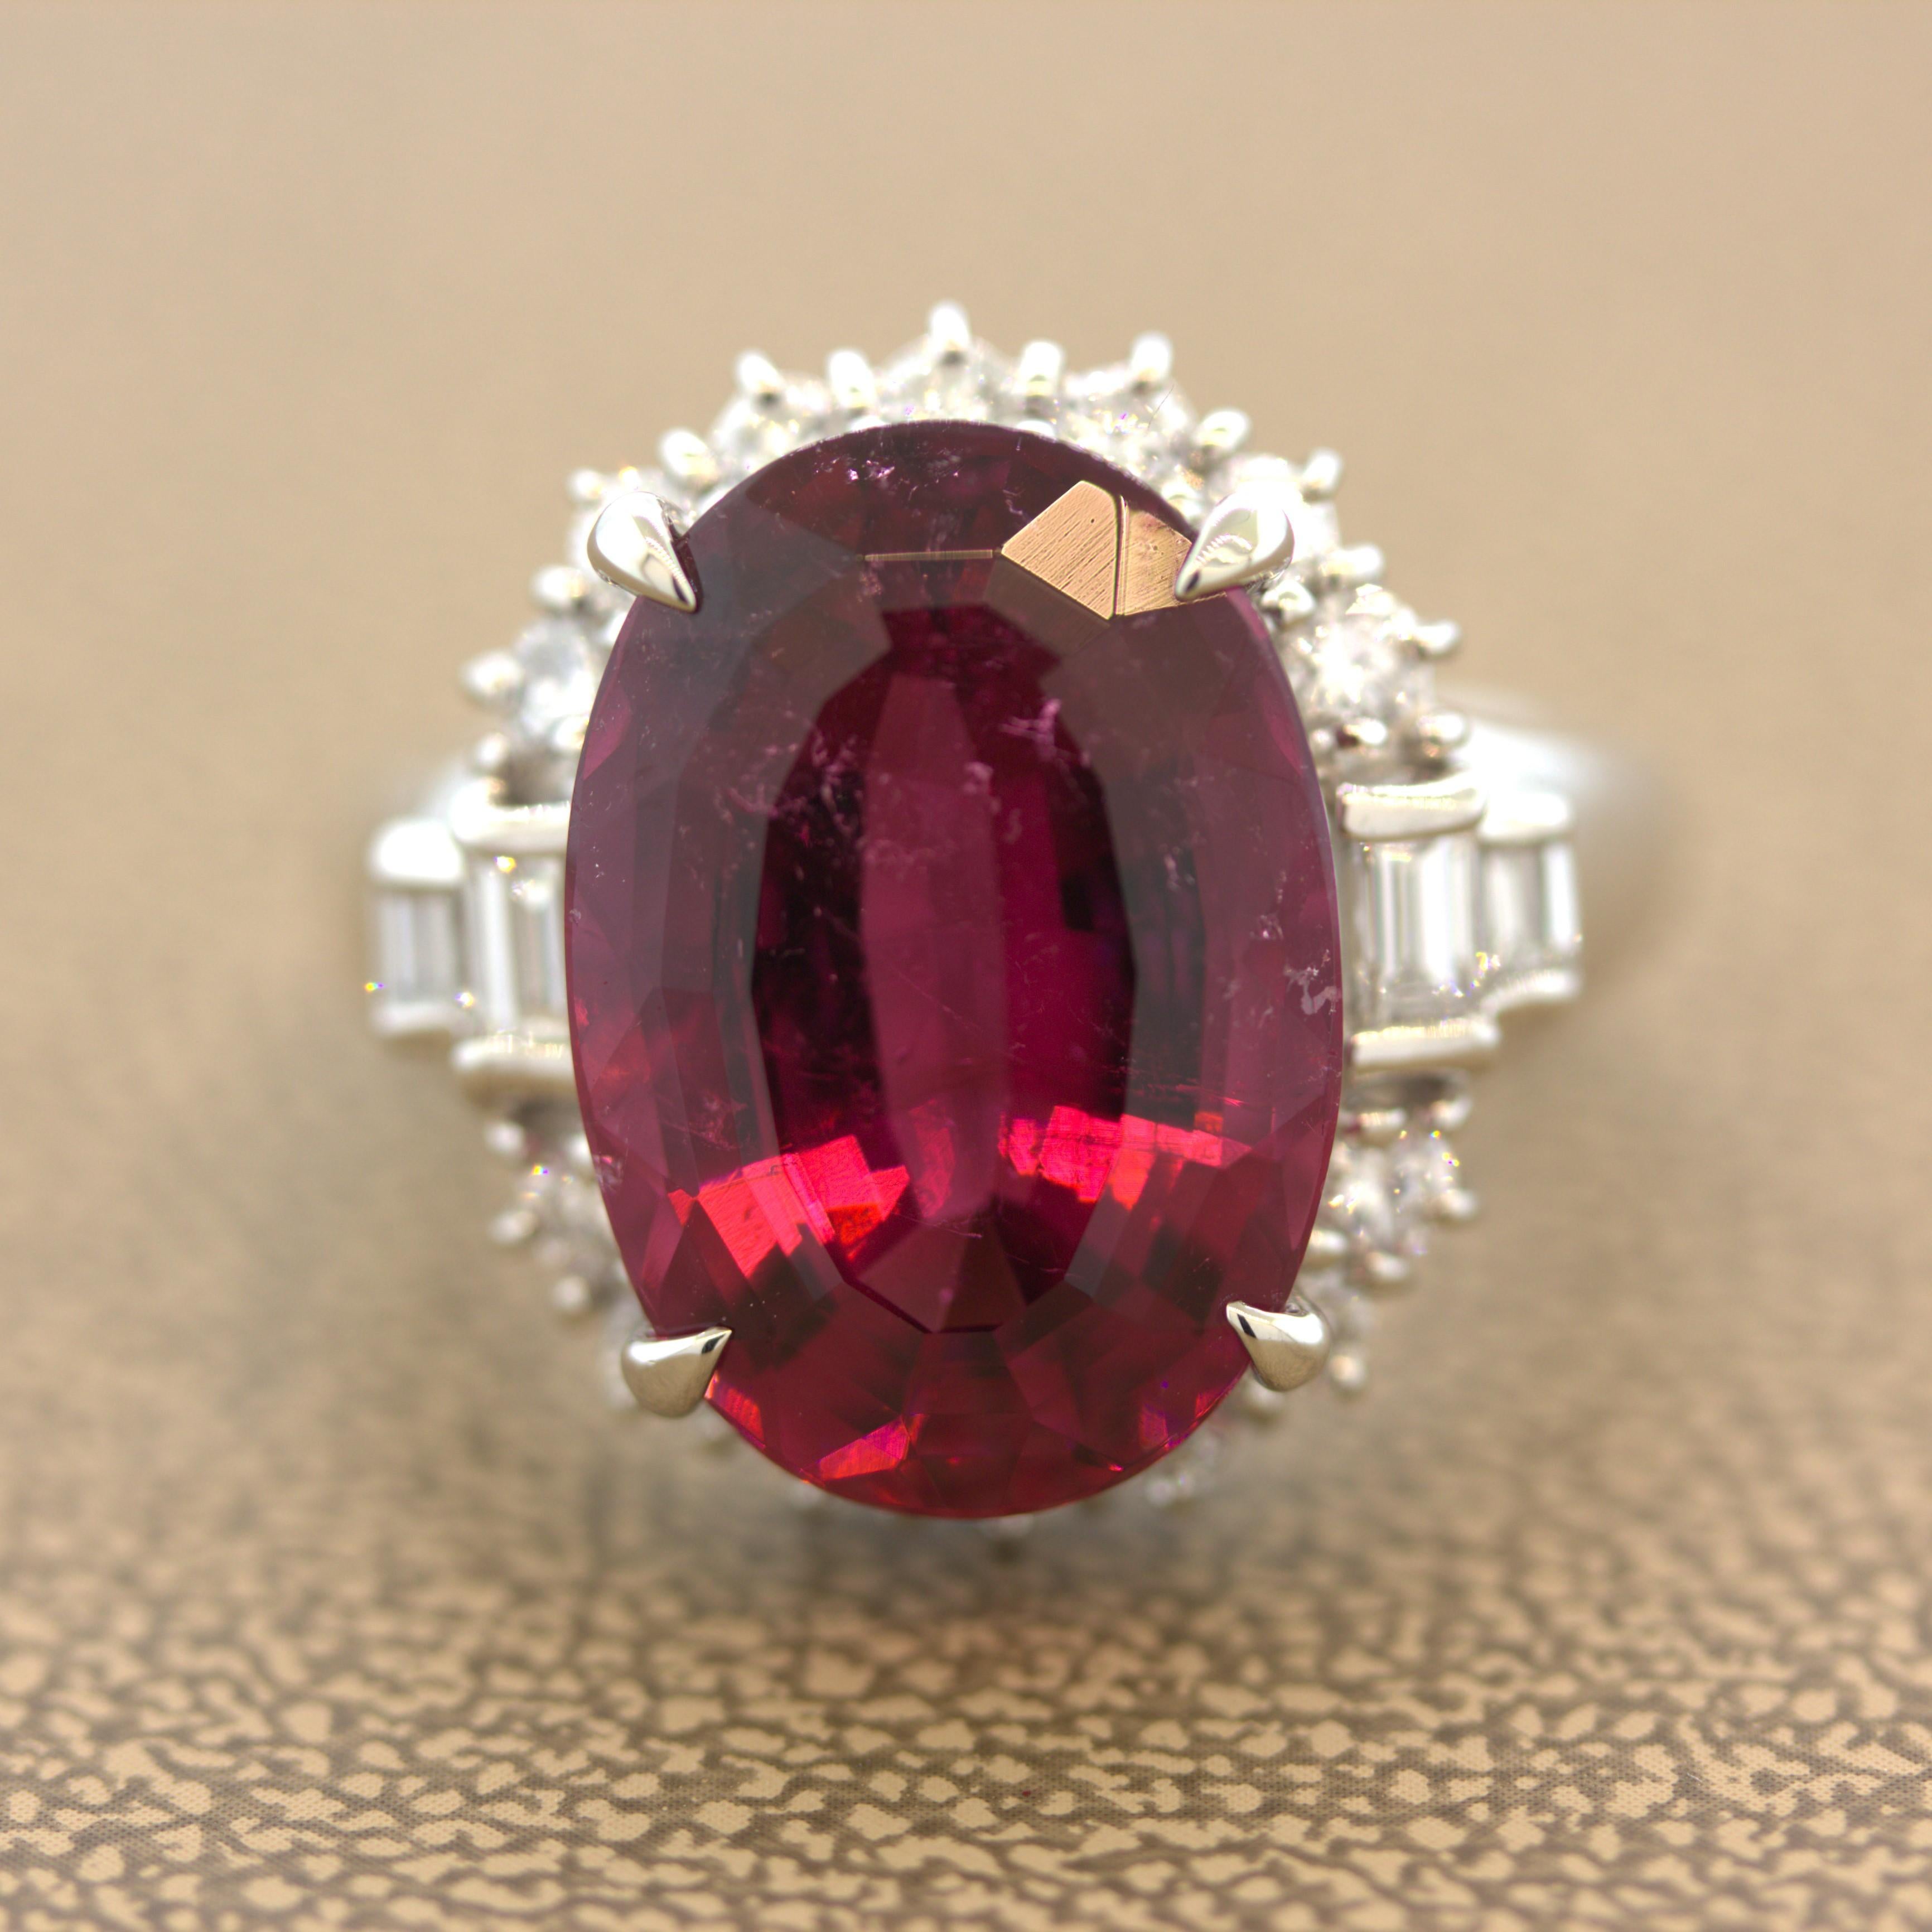 A chic and classy ring featuring a vibrant rubellite tourmaline weighing 9.46 carats. It has a lovely oval shape along with a rich and brilliant red color that will make you smile. It is complemented by 1.00 carat of round brilliant and baguette-cut